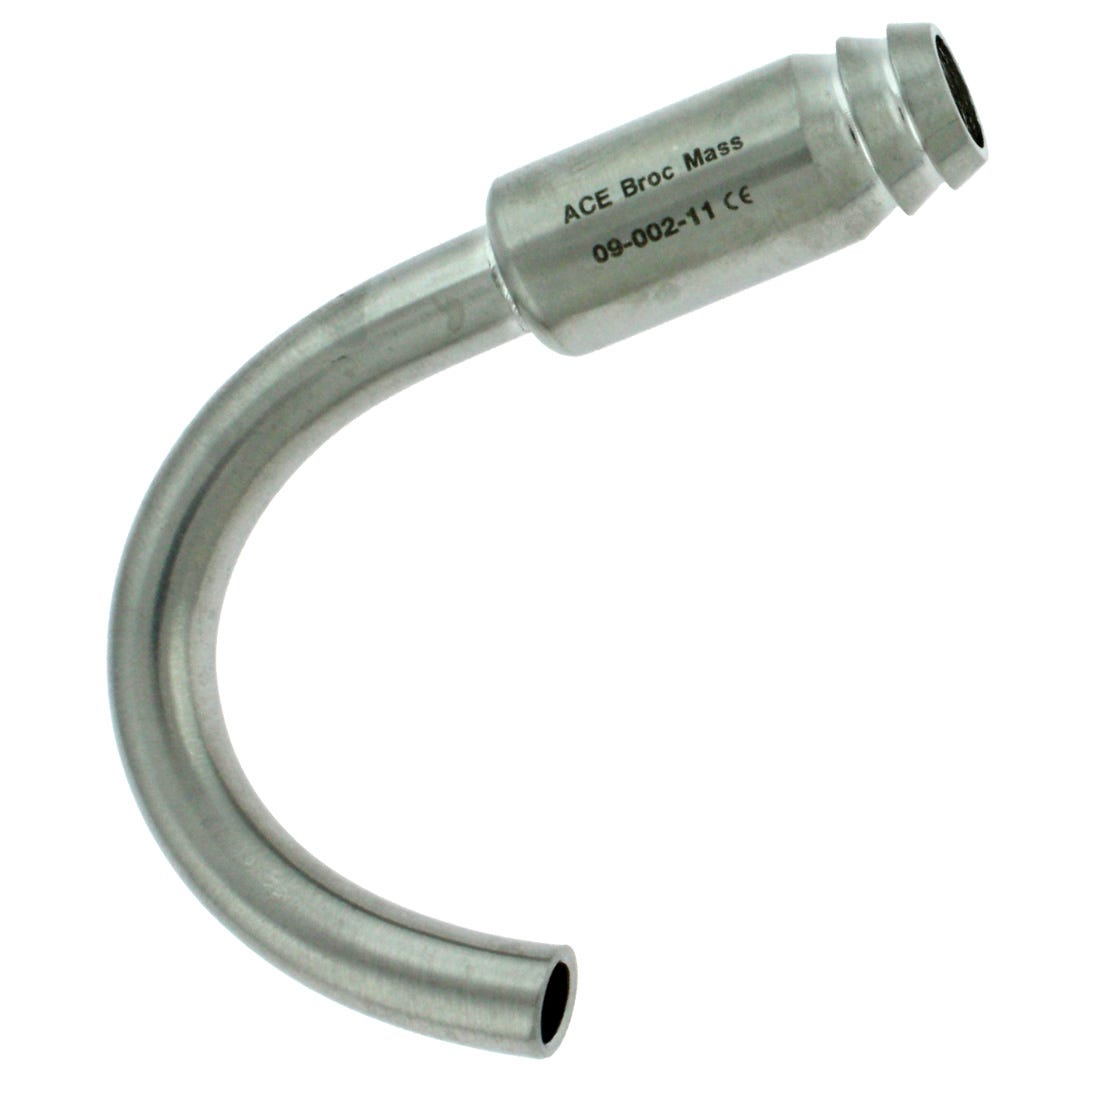 Suction Tubing Adapter, 5mm Head